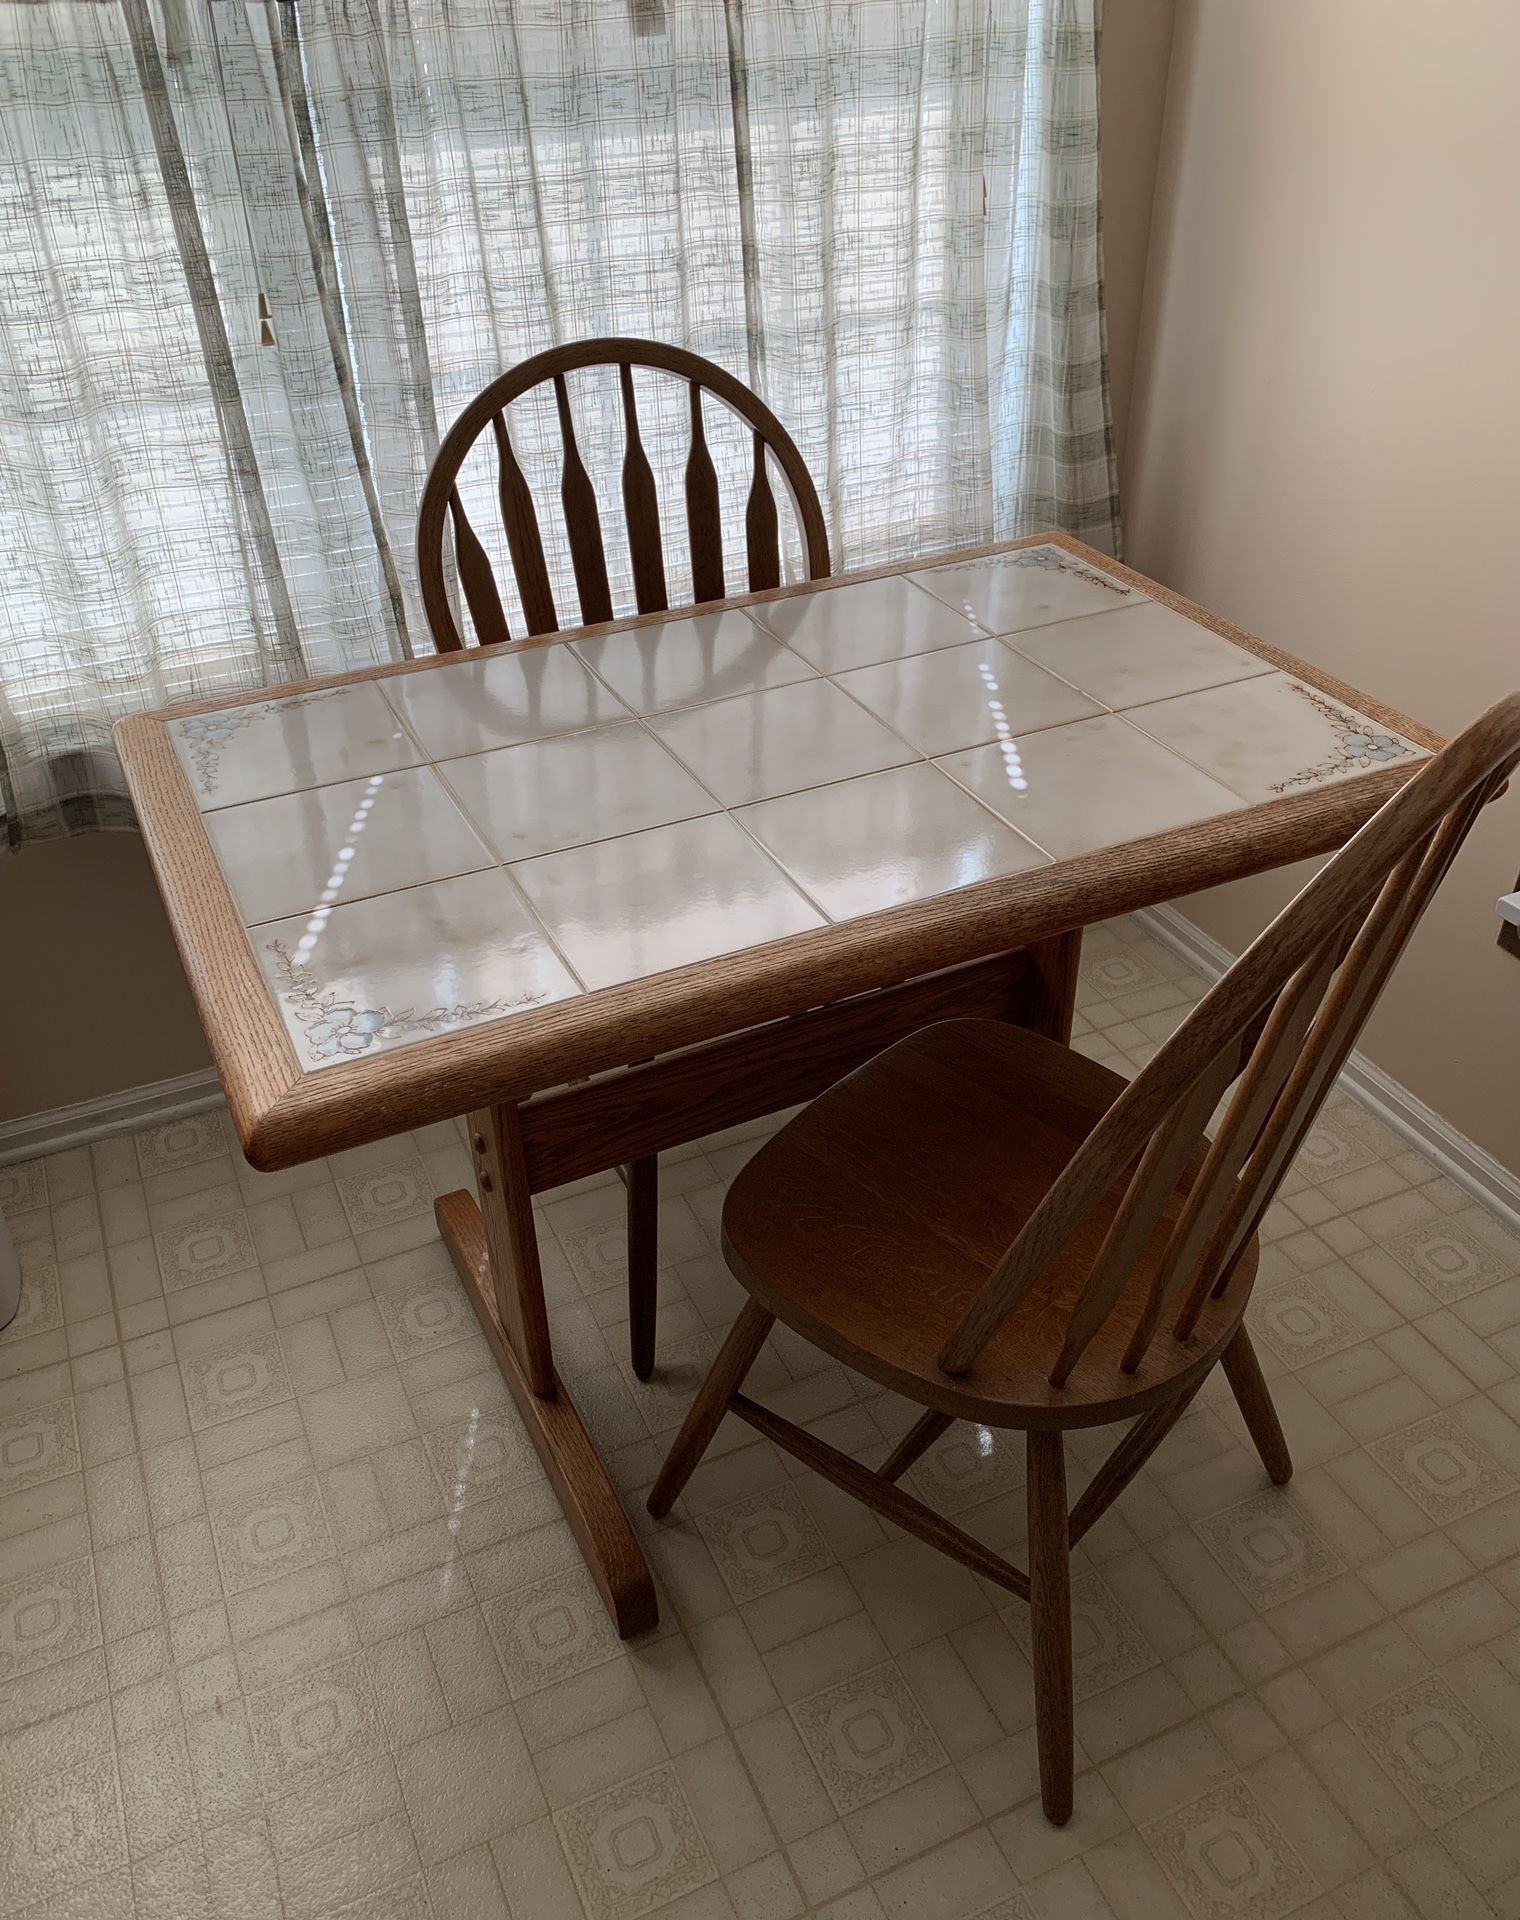 Two seater ceramic kitchen table